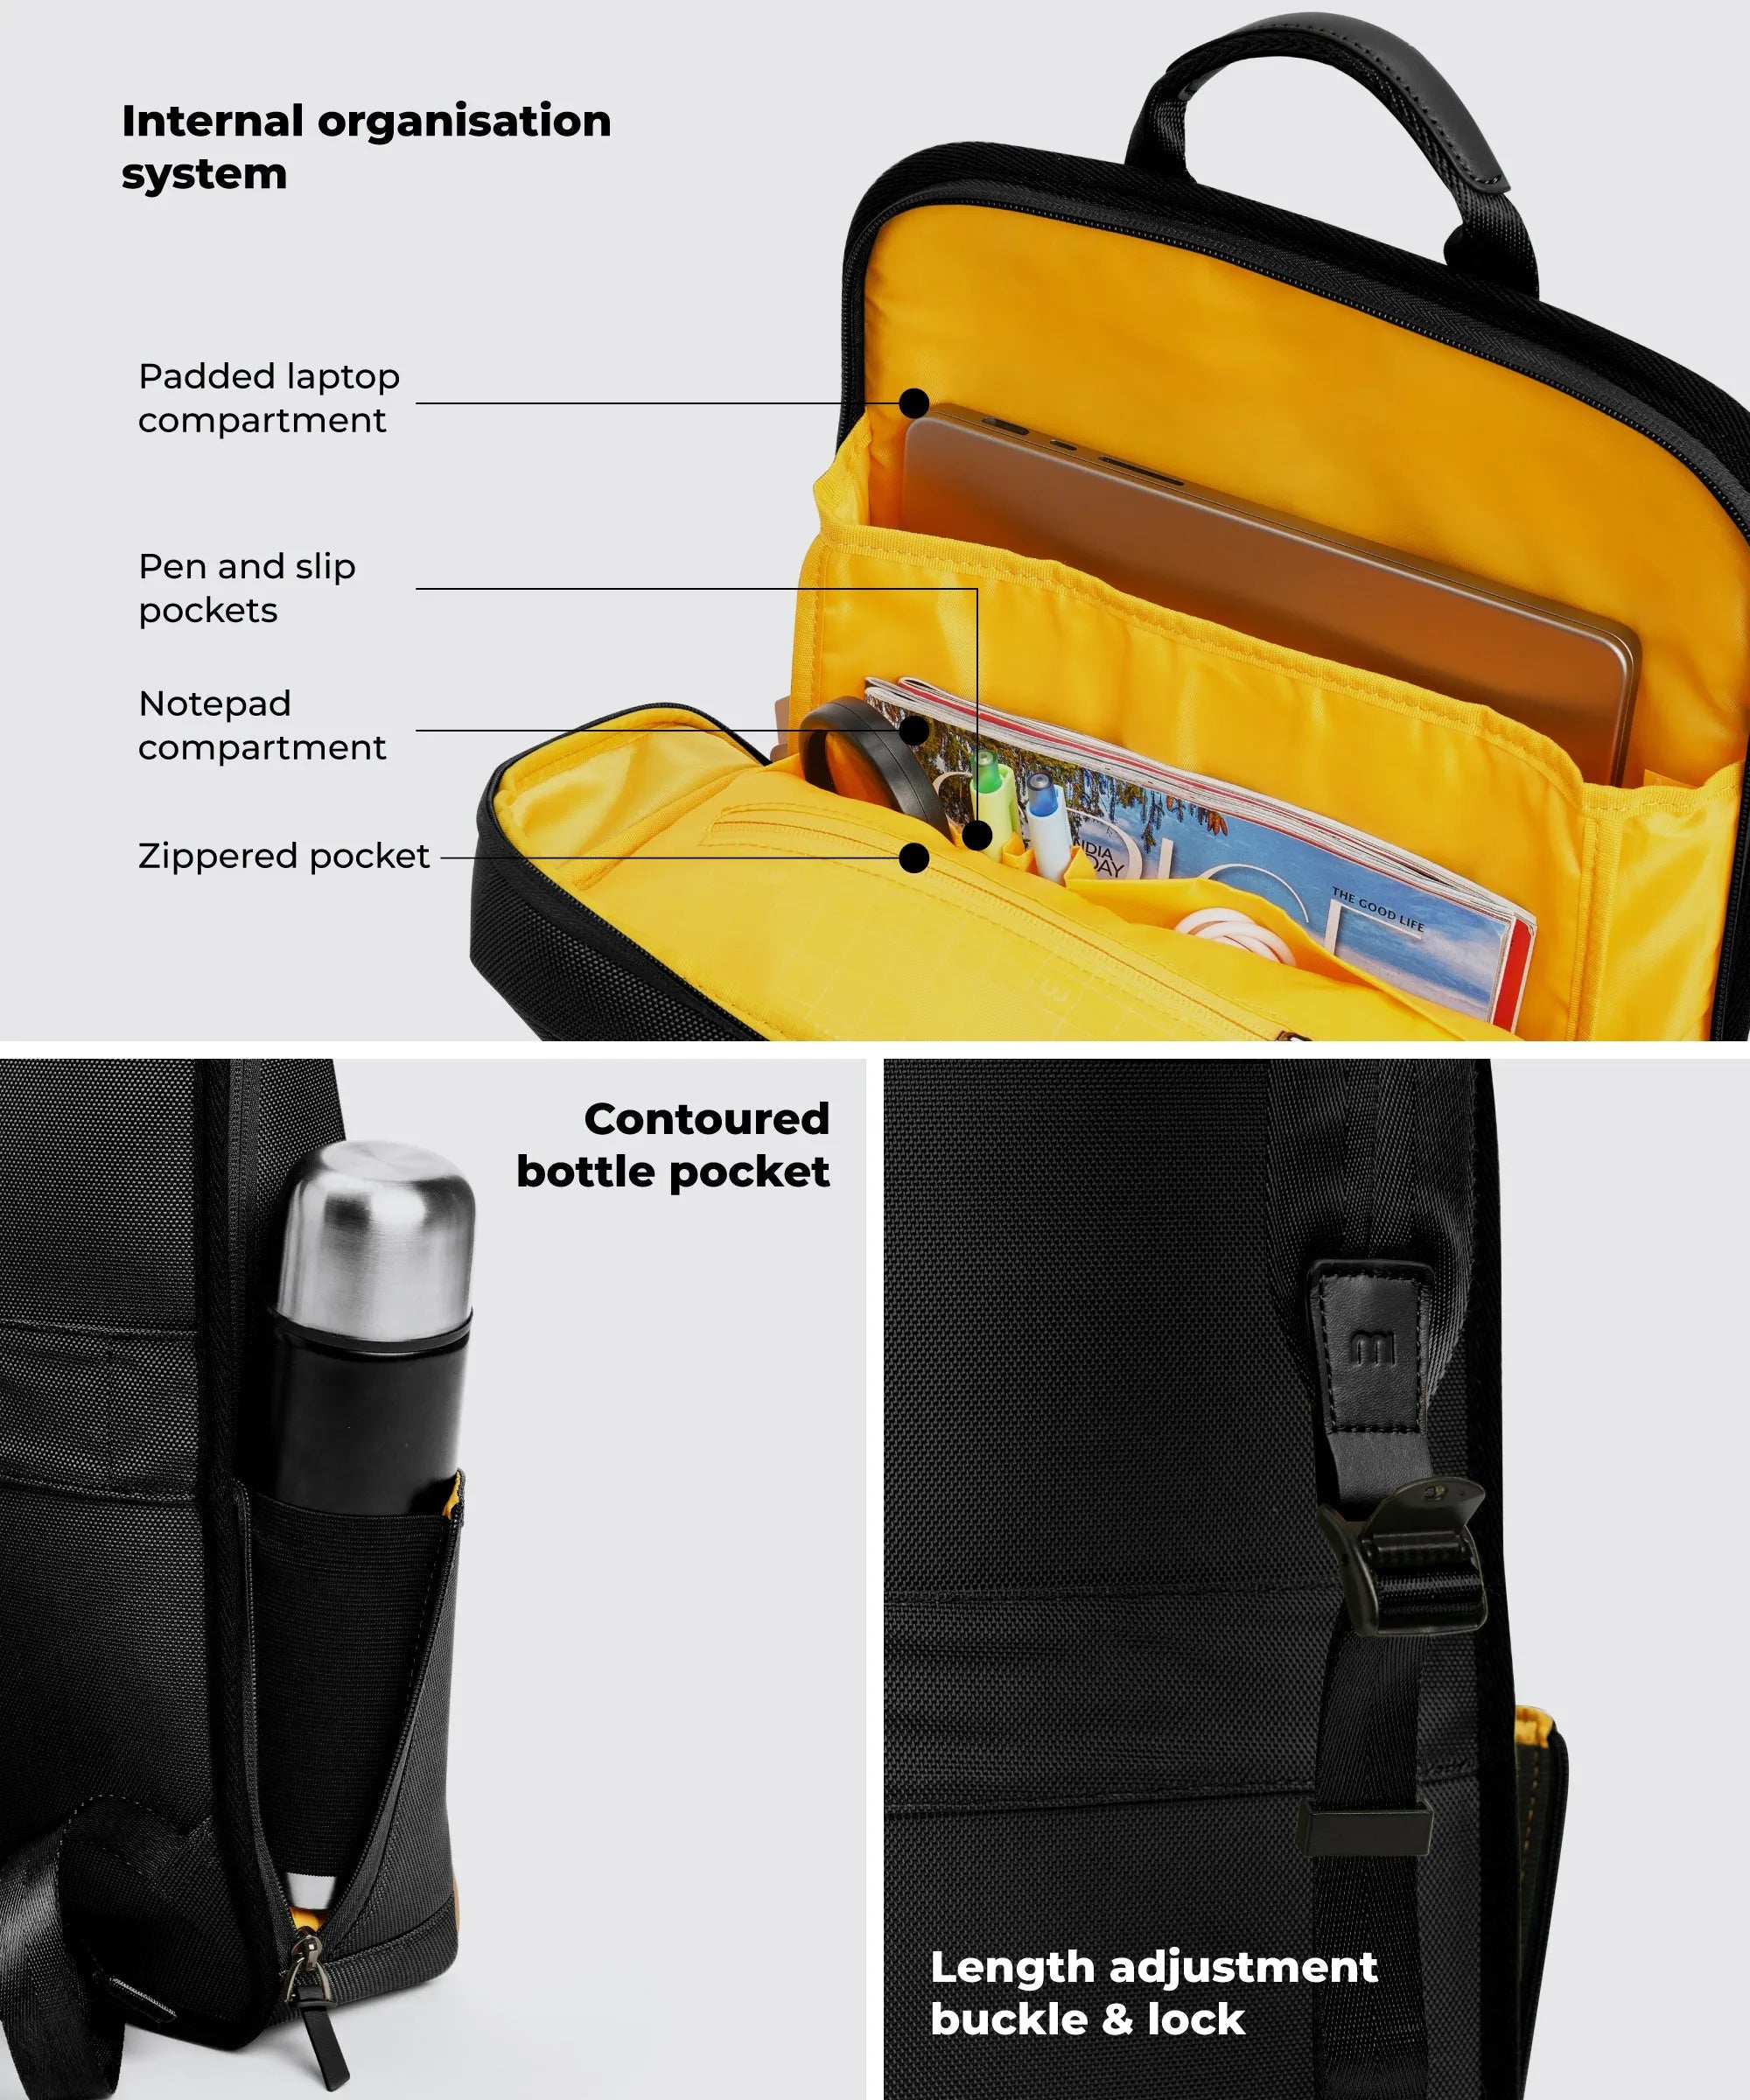 Color_Crypto | The Backpack Lite